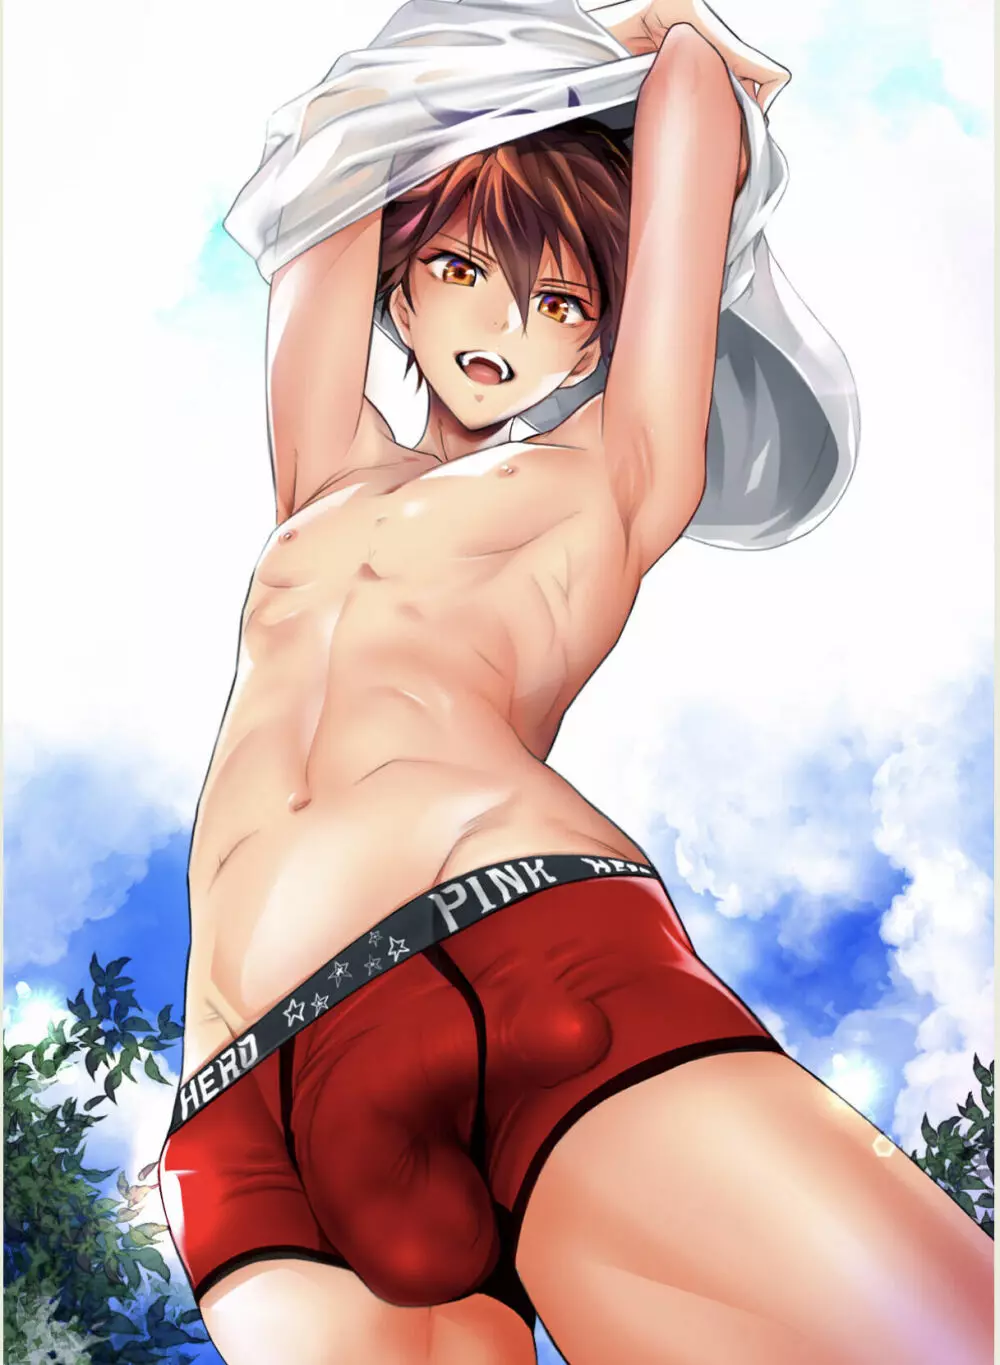 chiaki morisawa is hot and i want him inside me - page21